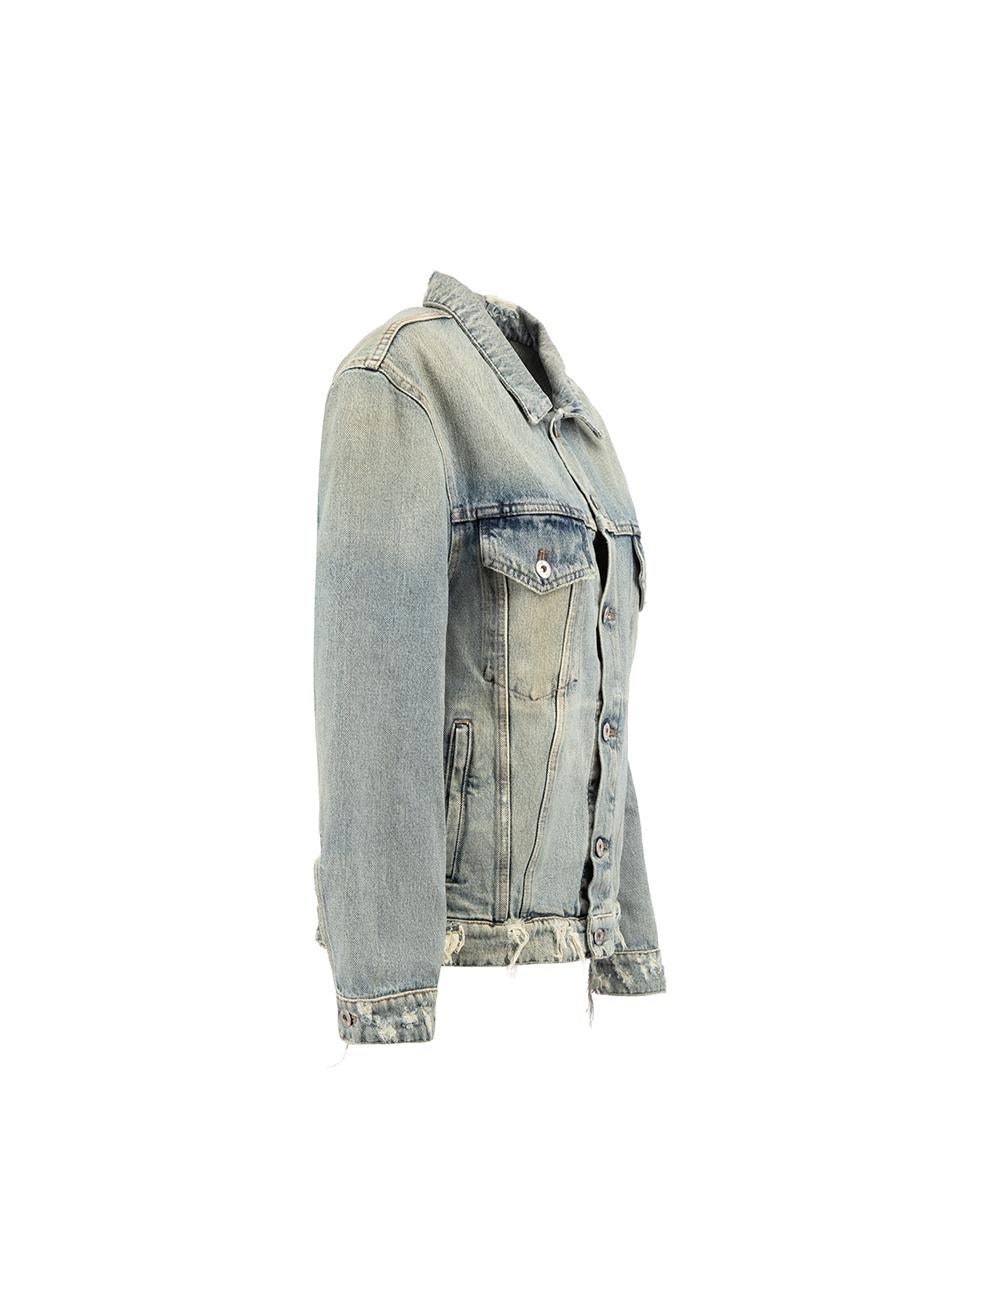 CONDITION is Very good. Hardly any visible wear to jacket is evident on this used Miu Miu designer resale item.
  
  Details
  2020
  Blue
  Cotton
  Denim jacket
  Oversized fit
  Button up fastening
  Buttoned cuffs
  4x Front pockets
  Distressed